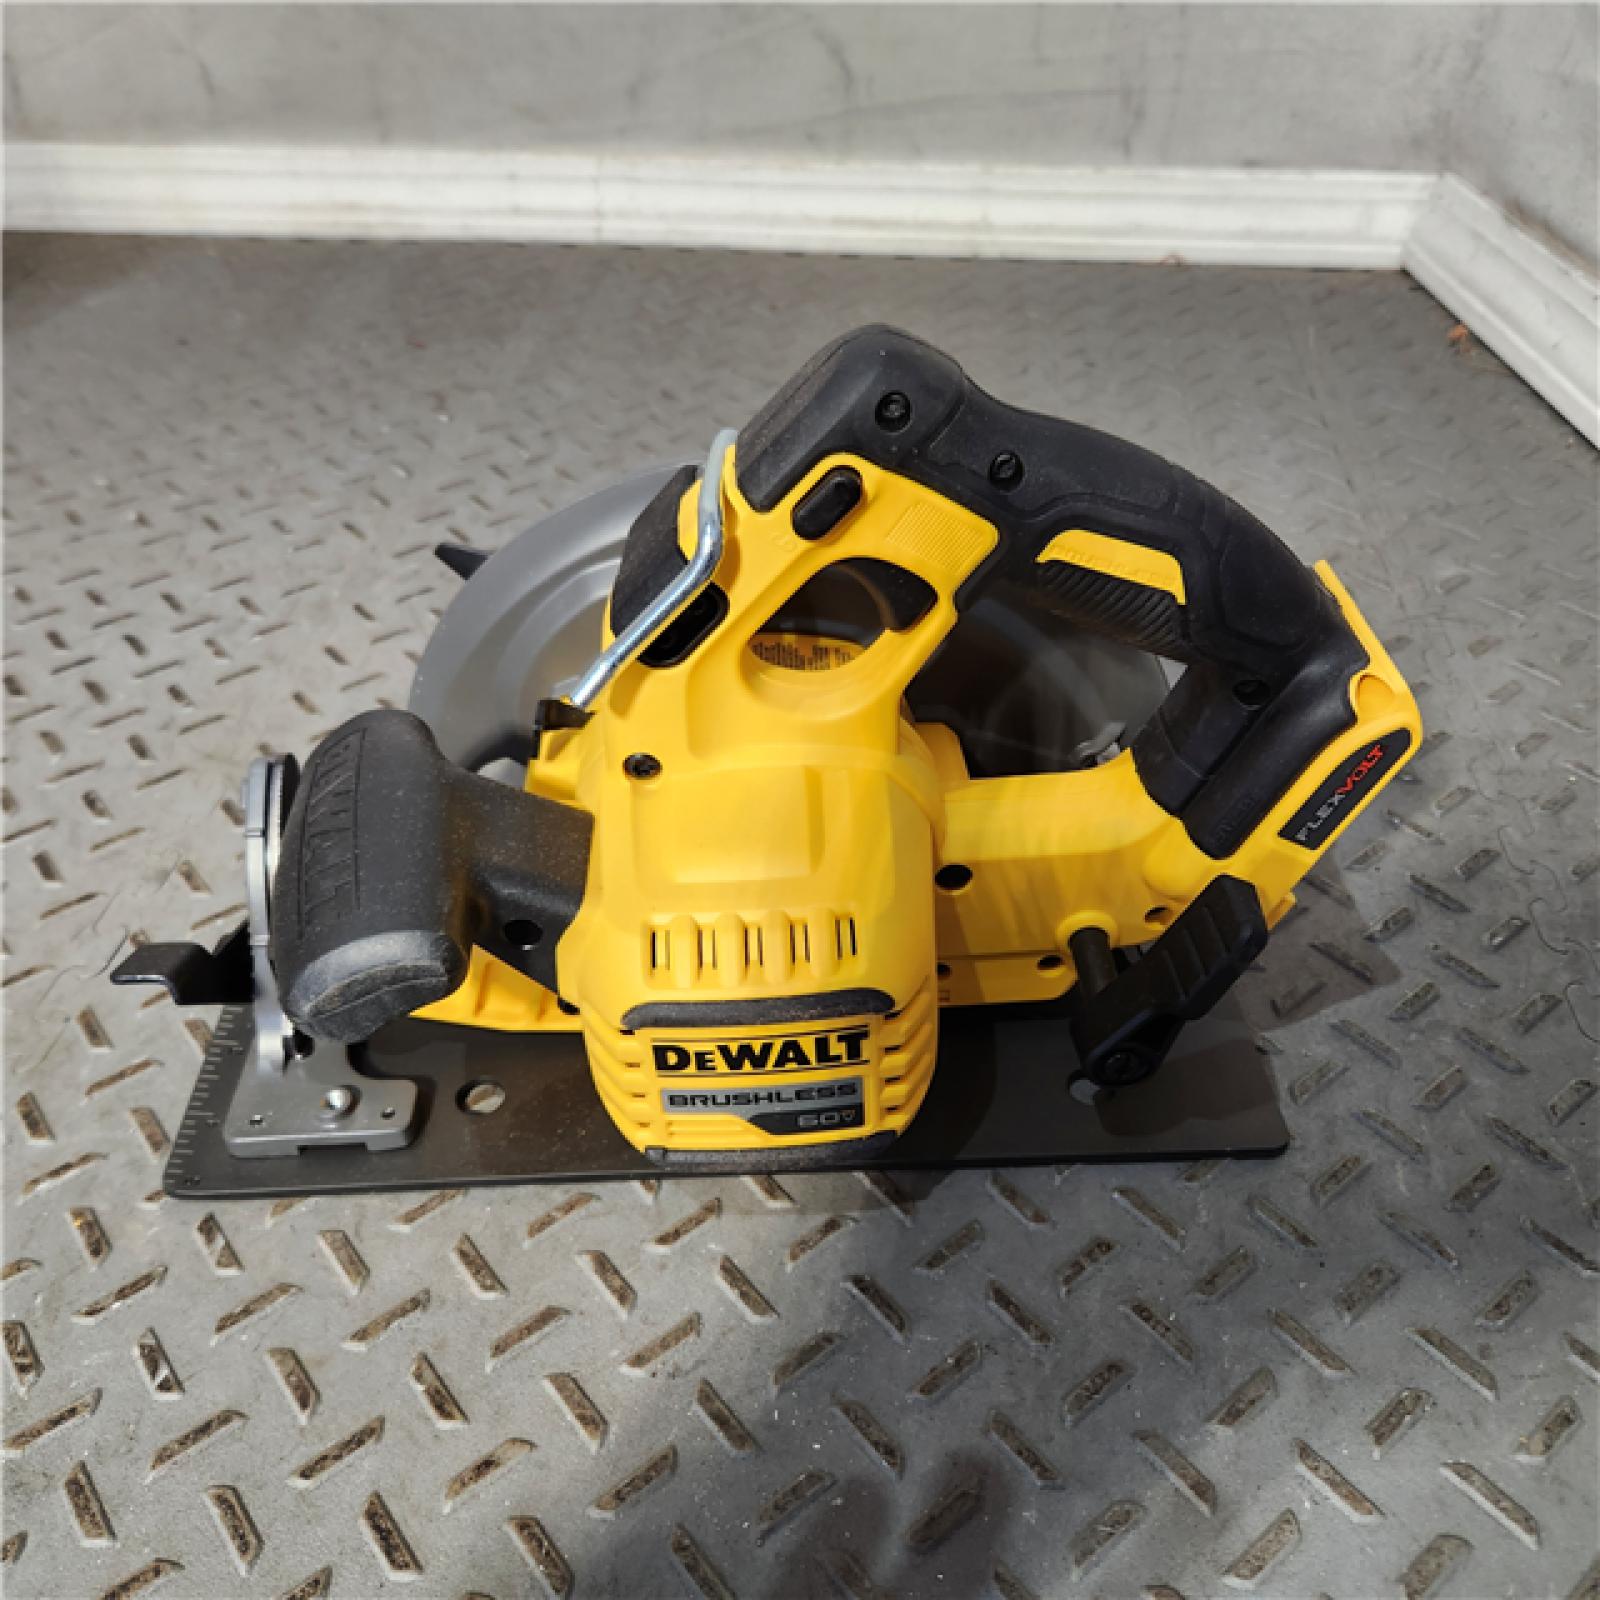 HOUSTON Location-AS-IS-DeWALT Flexvolt Max 7-1/4  60V Brushless Circular Saw DCS578B (Bare Tool) APPEARS IN NEW! Condition